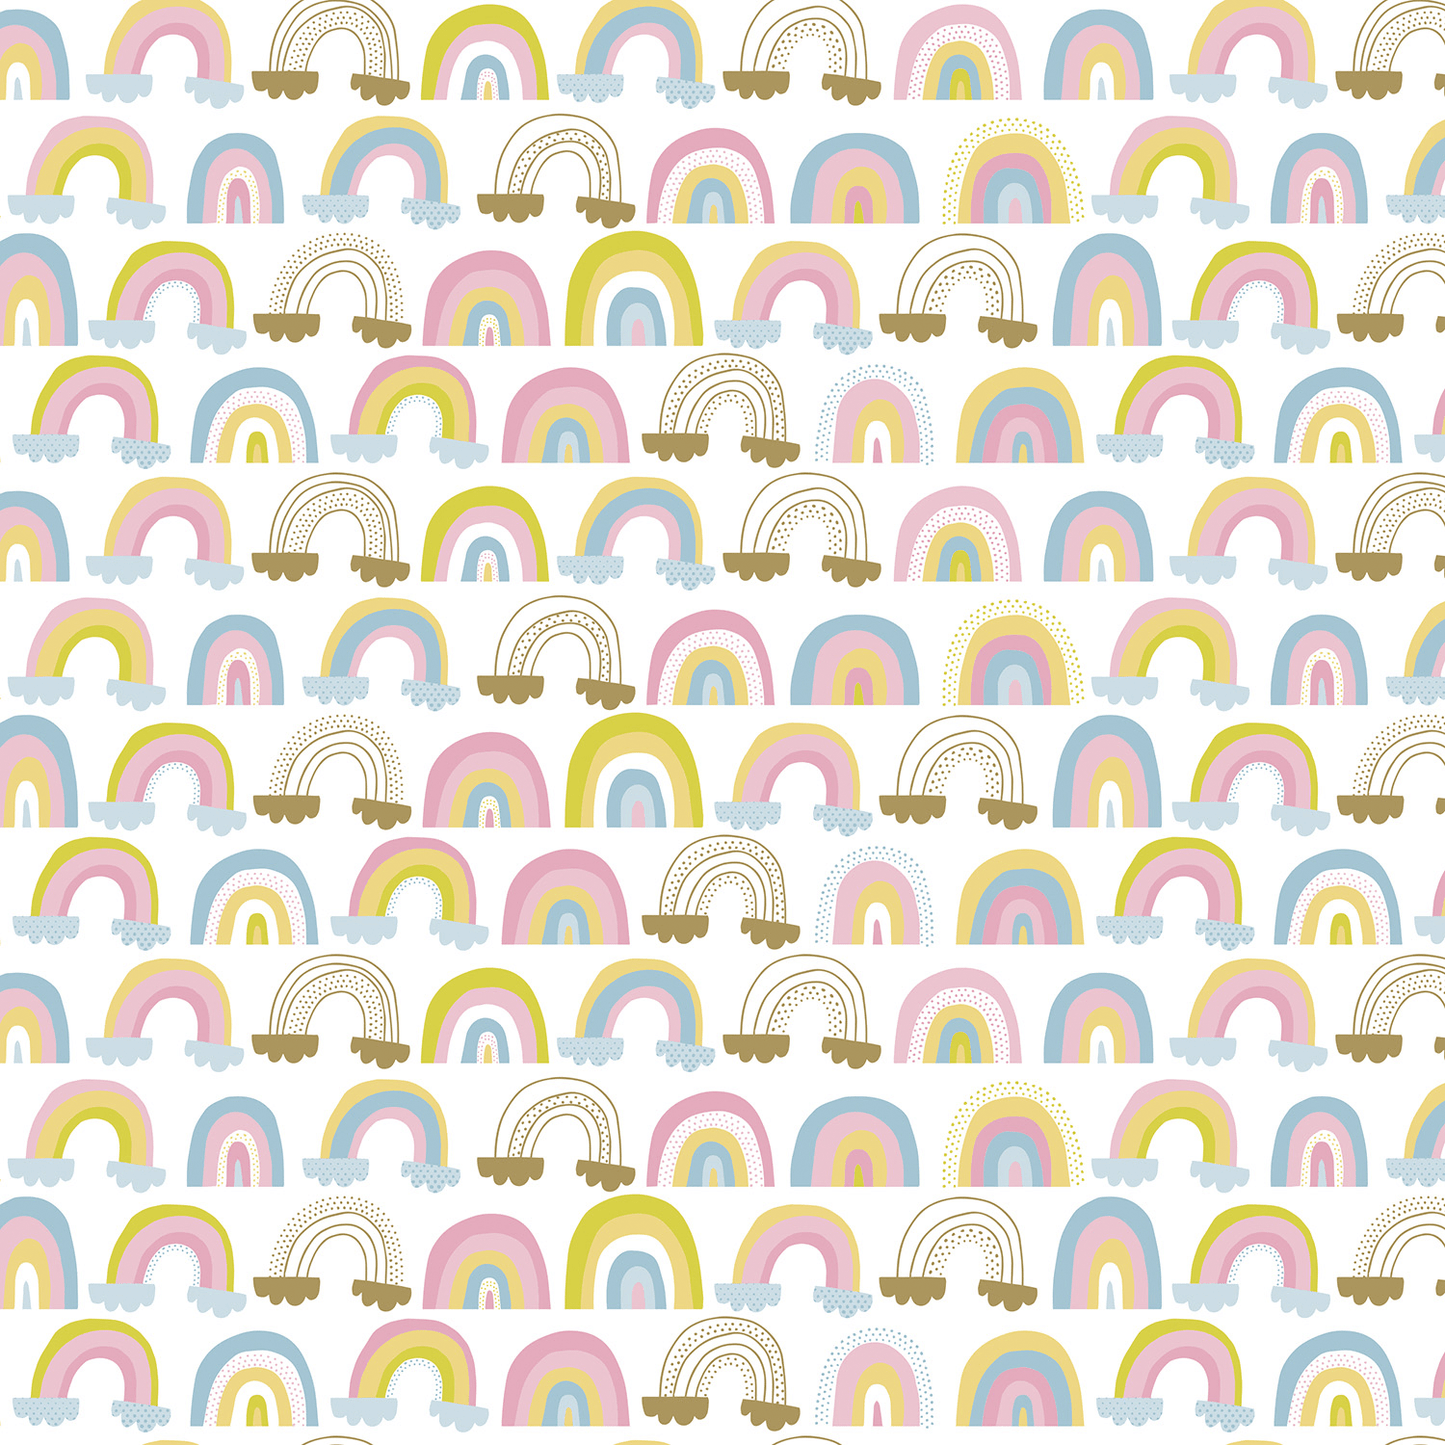 Pink mustard light blue baby rainbows with clouds on whited wrapping paper